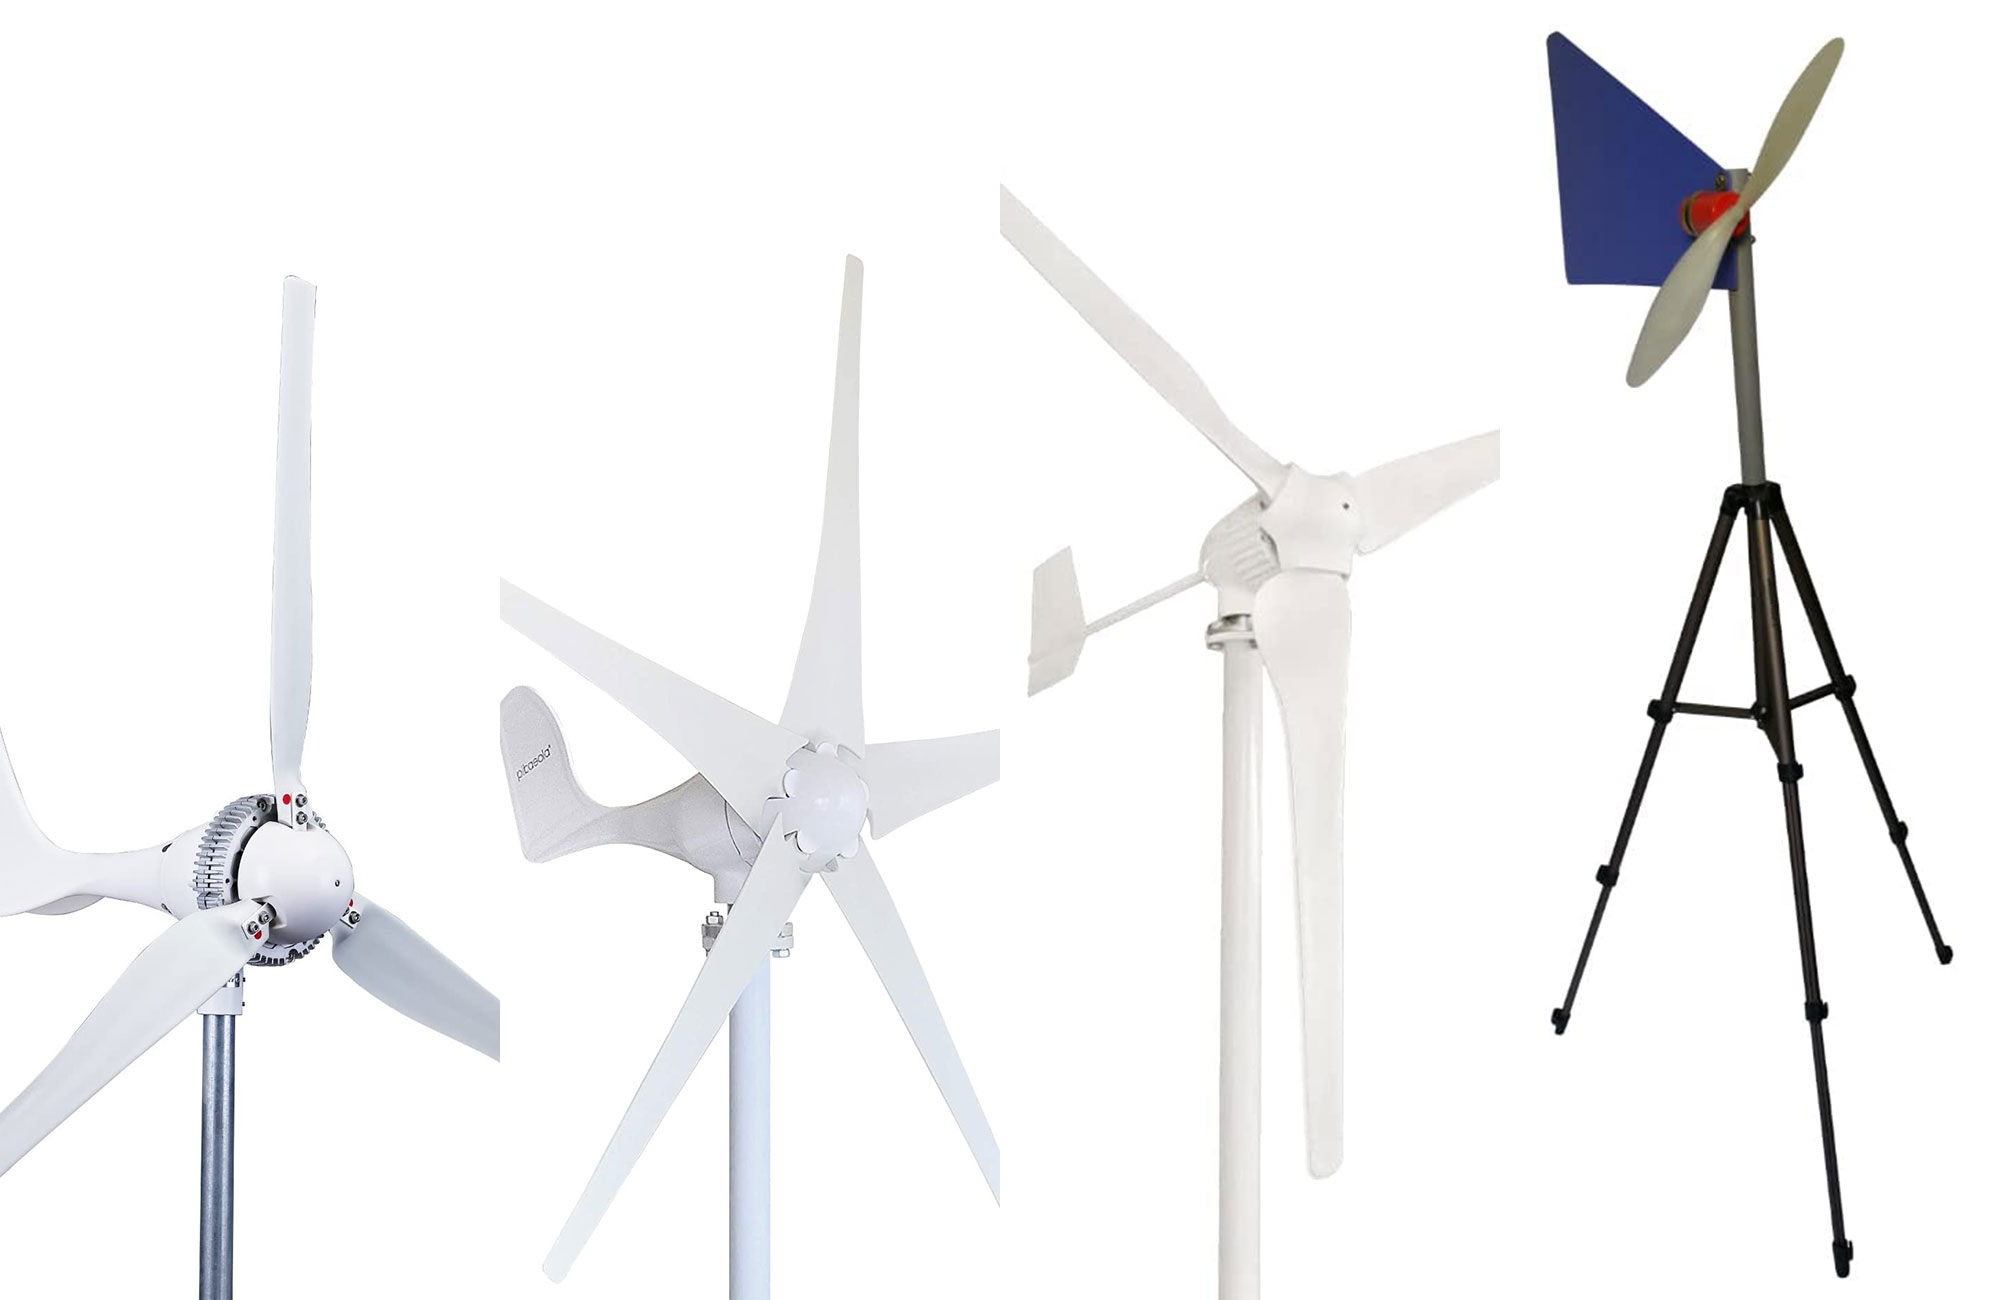 Residential Wind Turbine: Types, Components, & Incentives